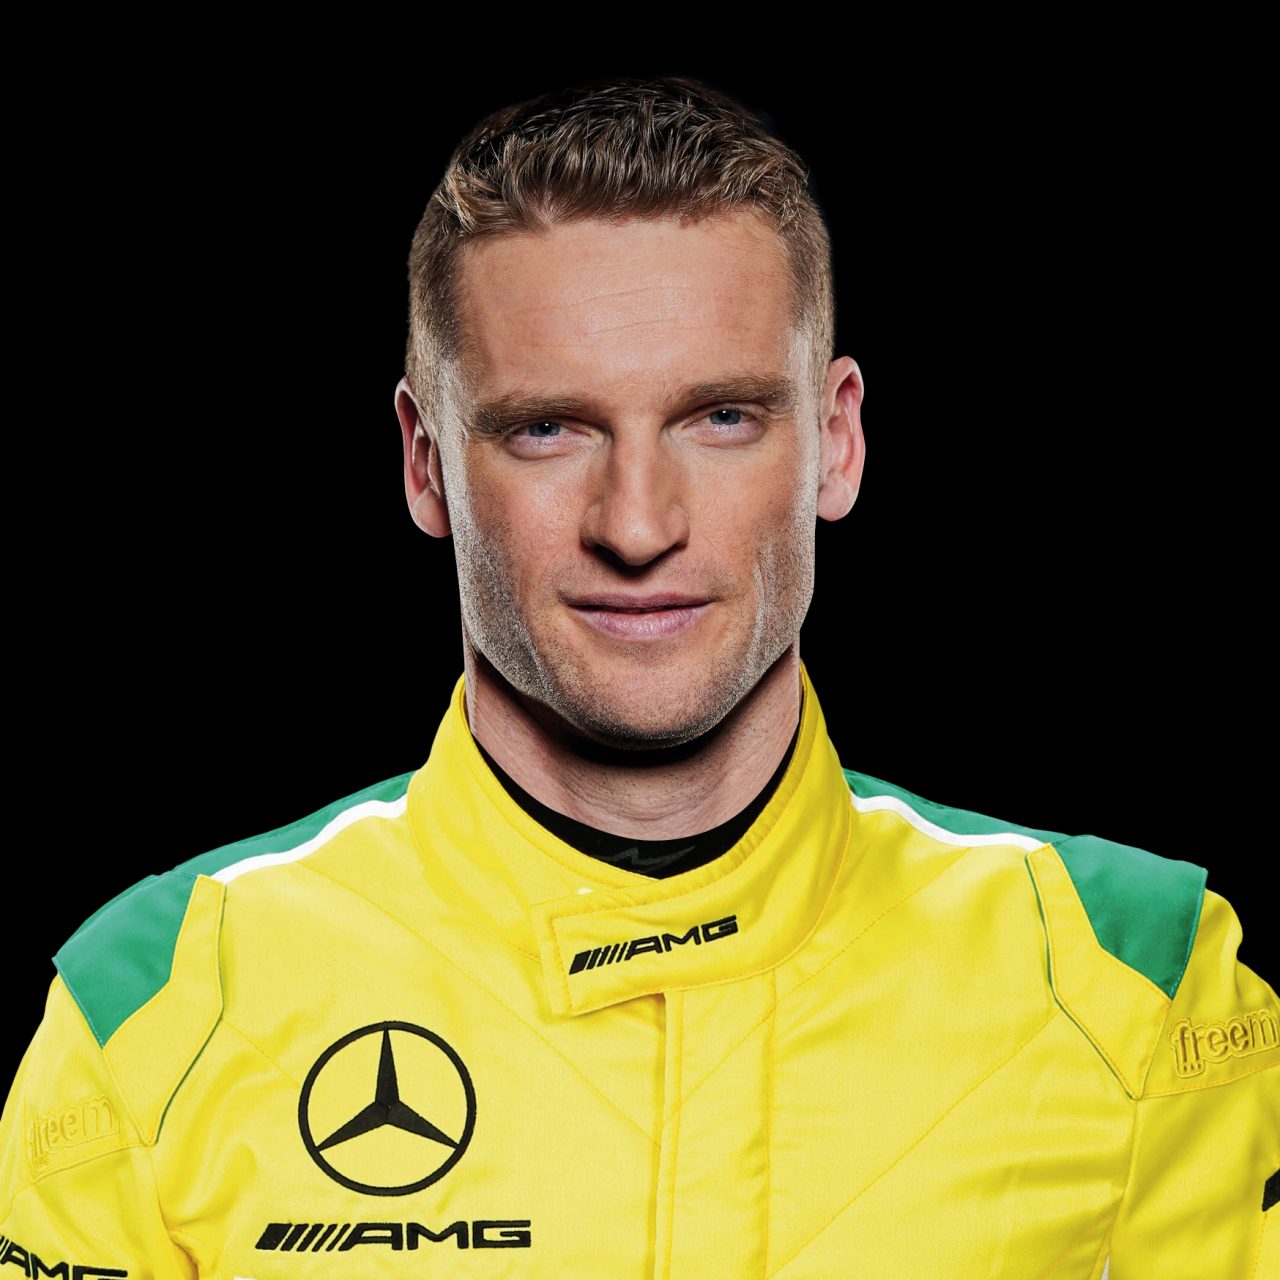 In yellow-green racing suit - MANN-FILTER Mamba Driver 2024 Maro Engel GWTC